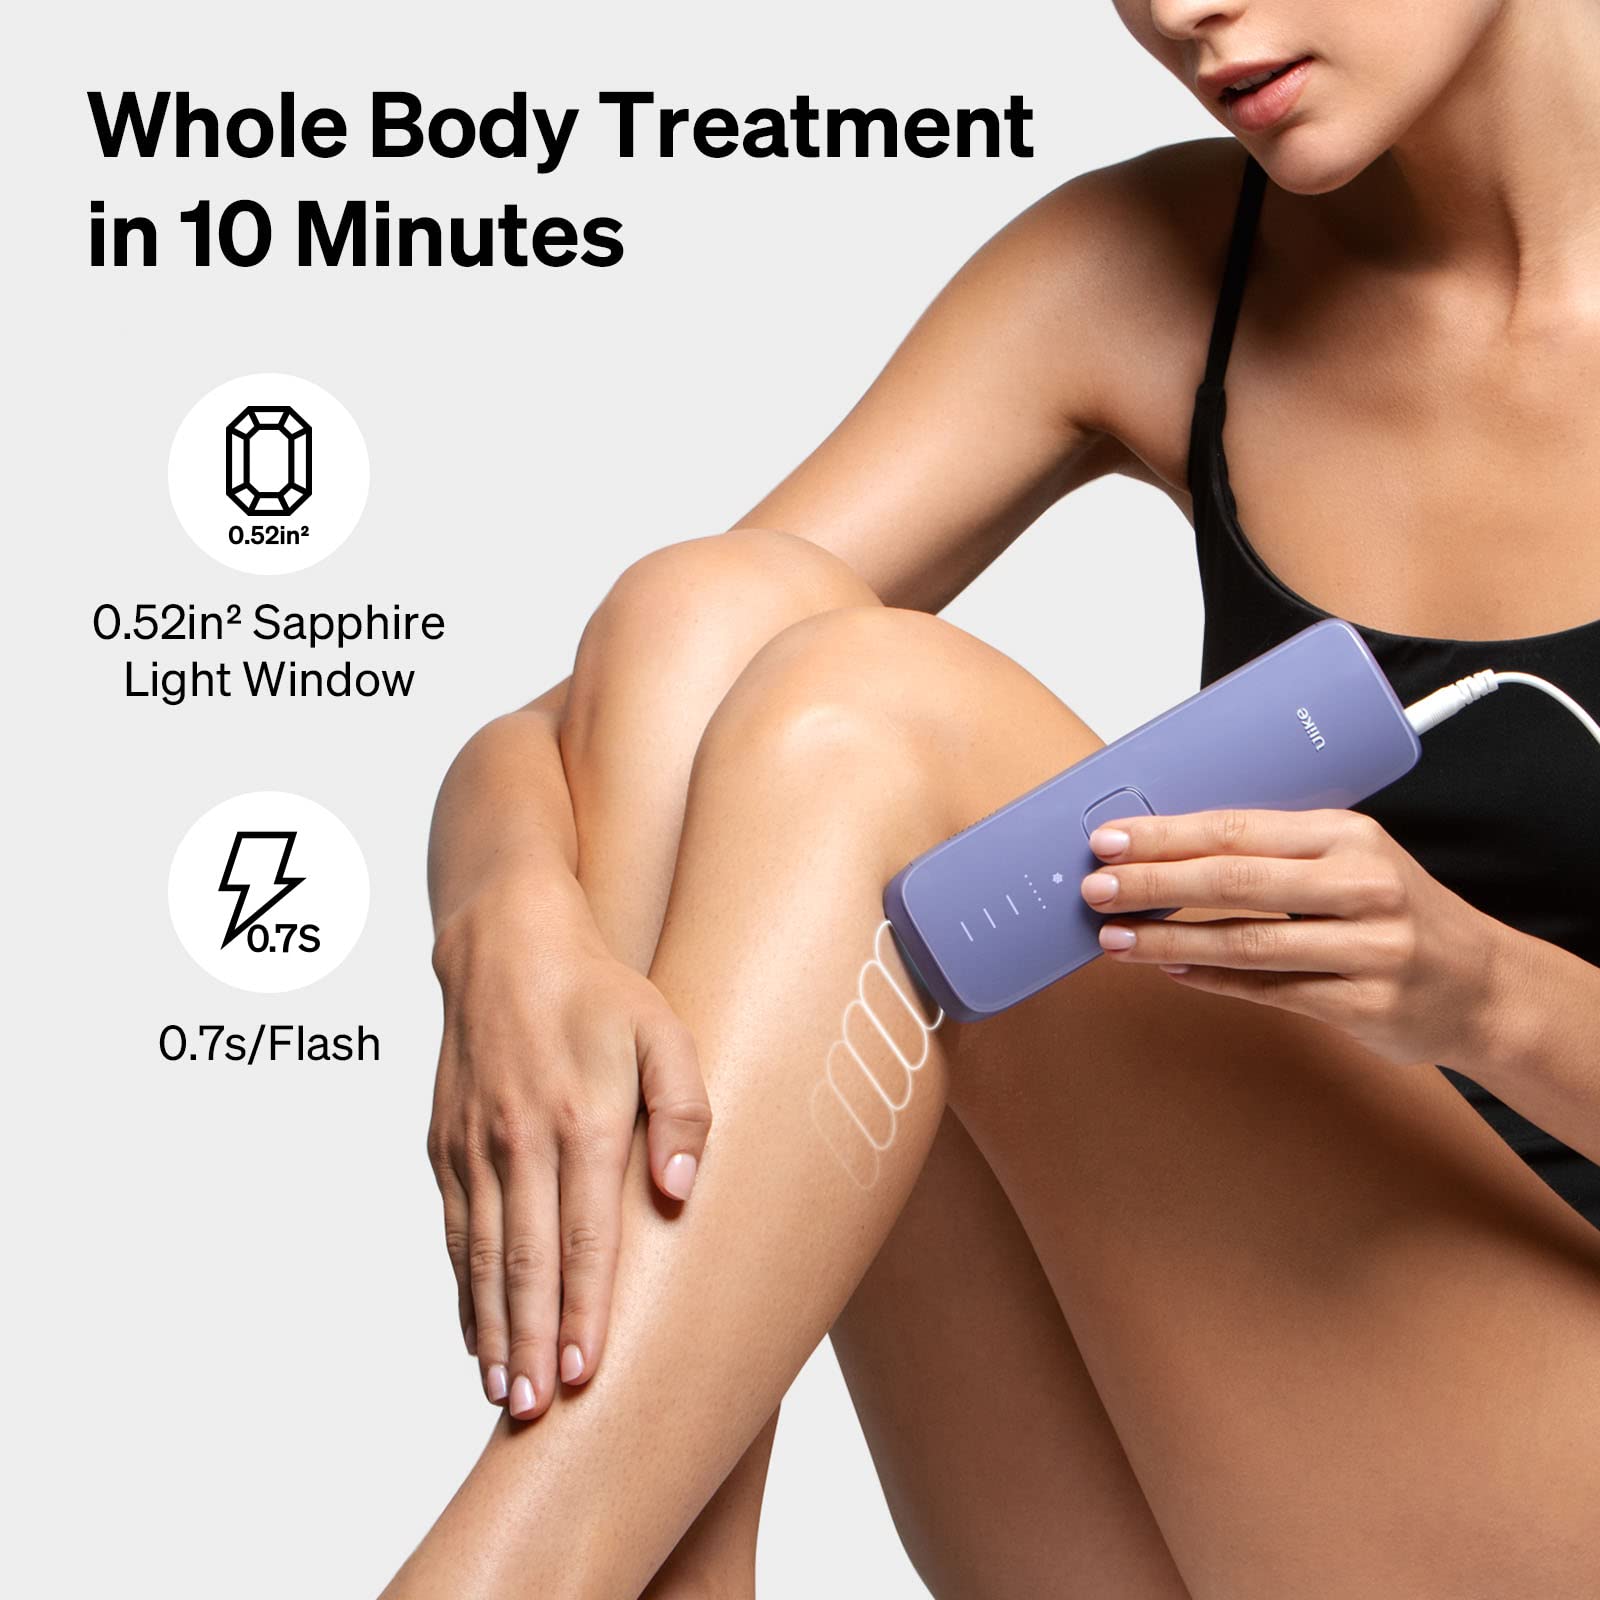 Ulike Laser Hair Removal for Women and Men, Air 3 IPL Hair Removal with Sapphire Ice-Cooling System for Painless & Long-Lasting Result, Flat-Head Window for Body & Face at-Home Use, Purple